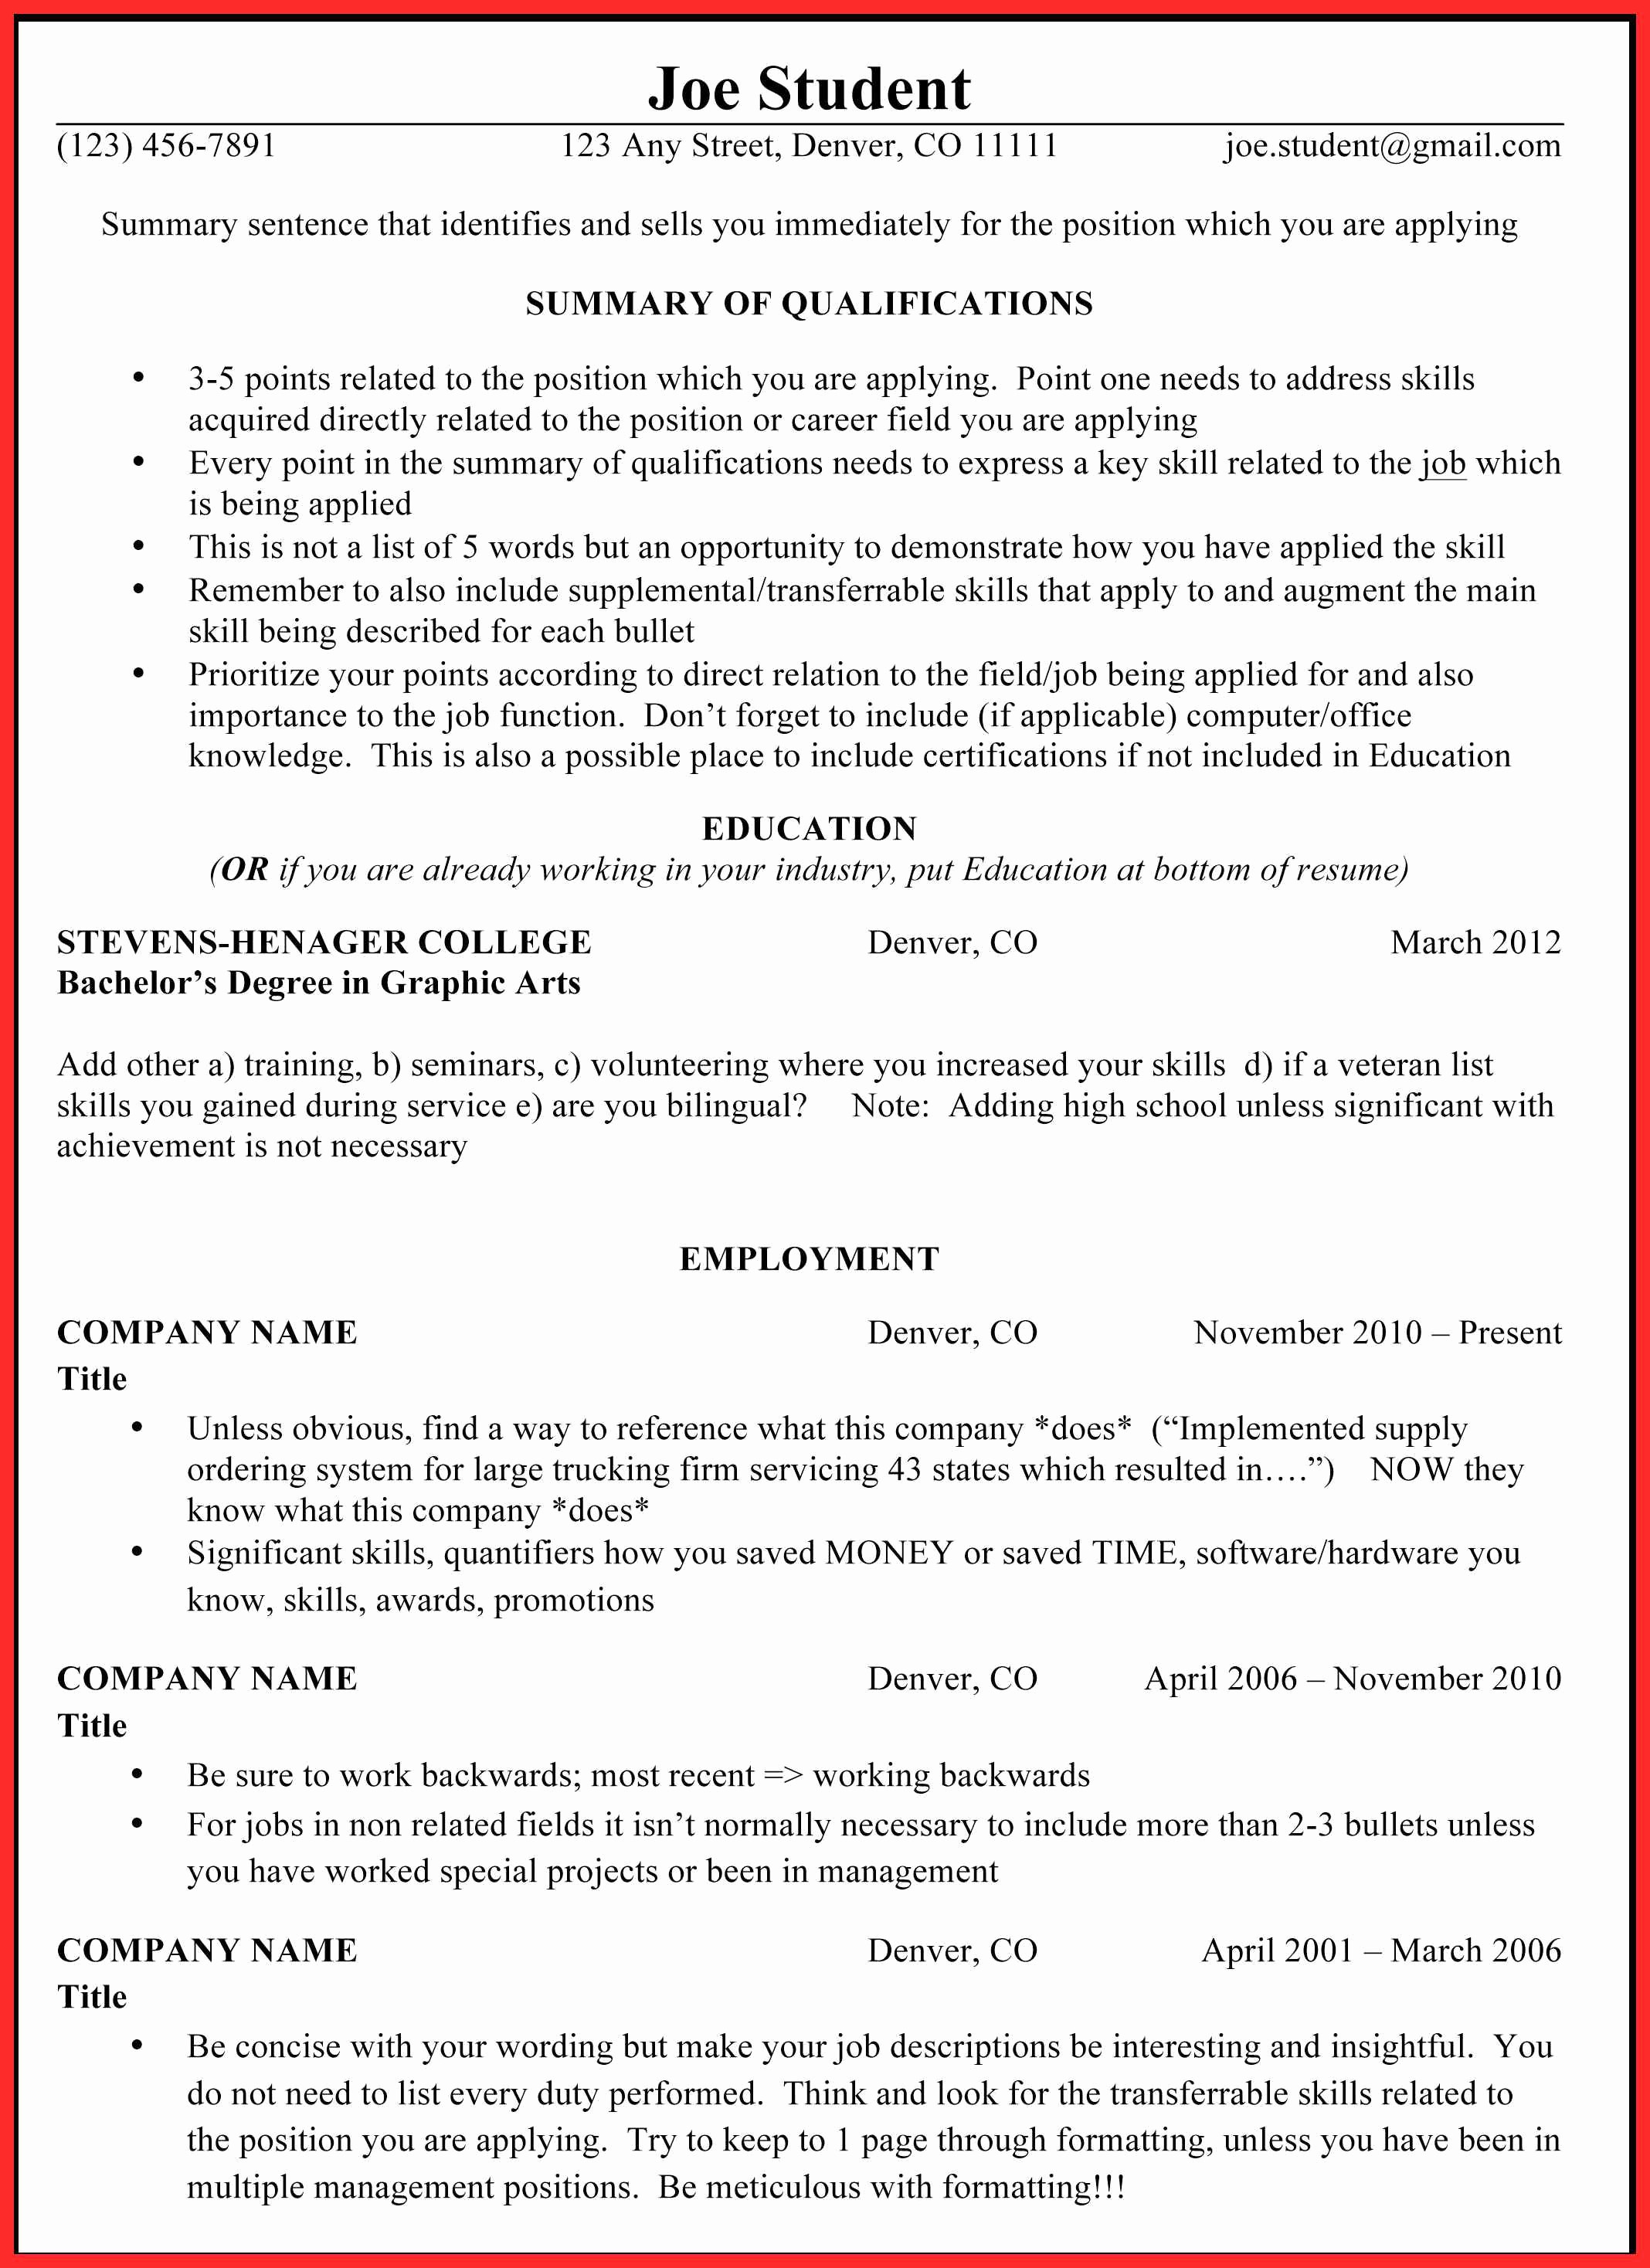 Copy Of A Resume format Awesome Paste Resume format